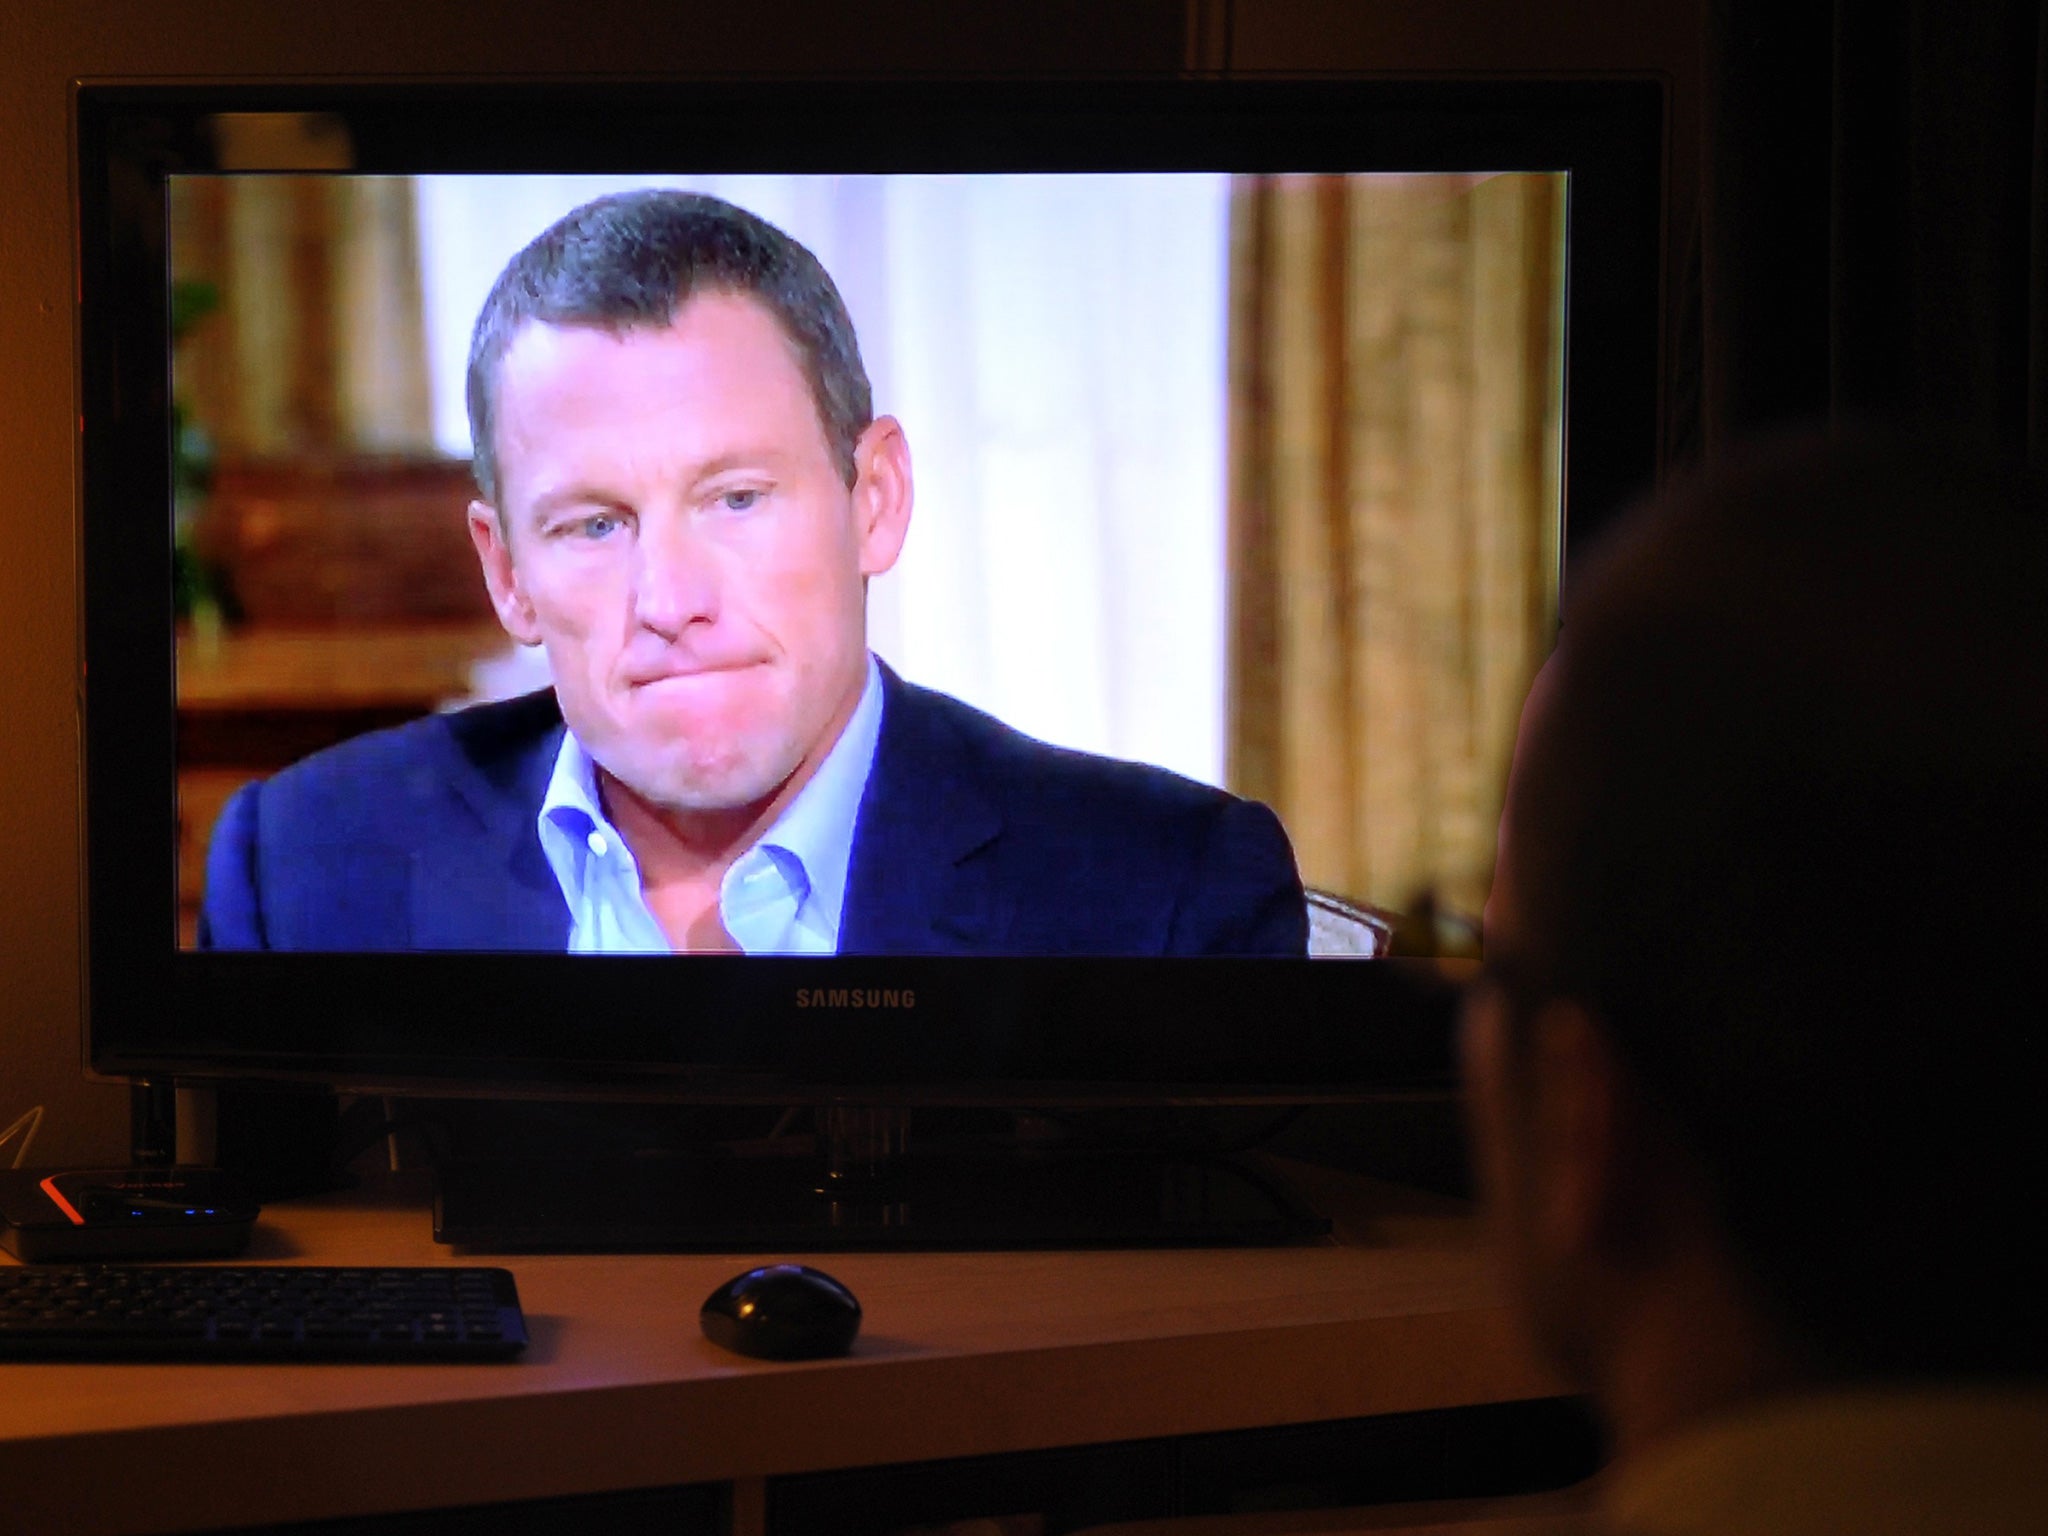 A man watching a TV showing disgraced cycling star Lance Armstrong being interviewed by Oprah Winfrey